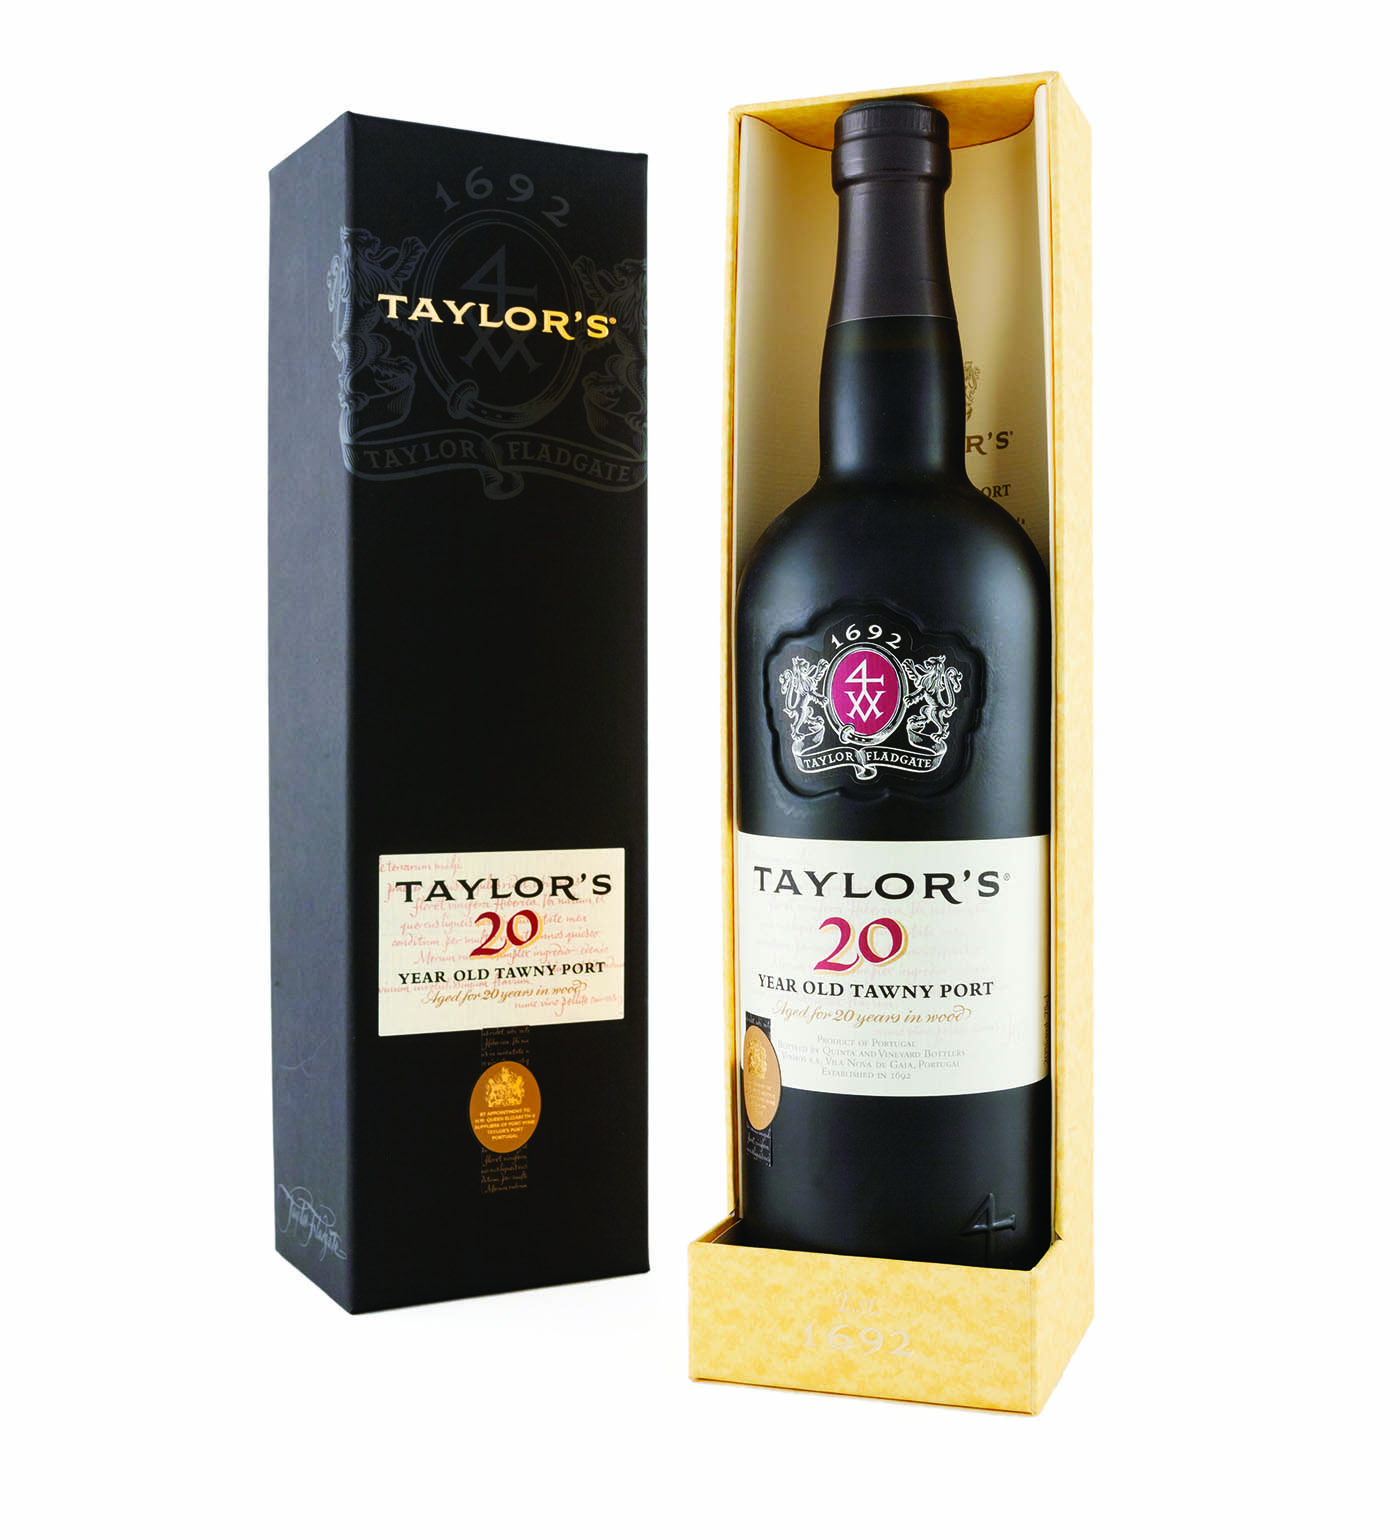 Taylor's Port 20 year old Tawny in luxury box